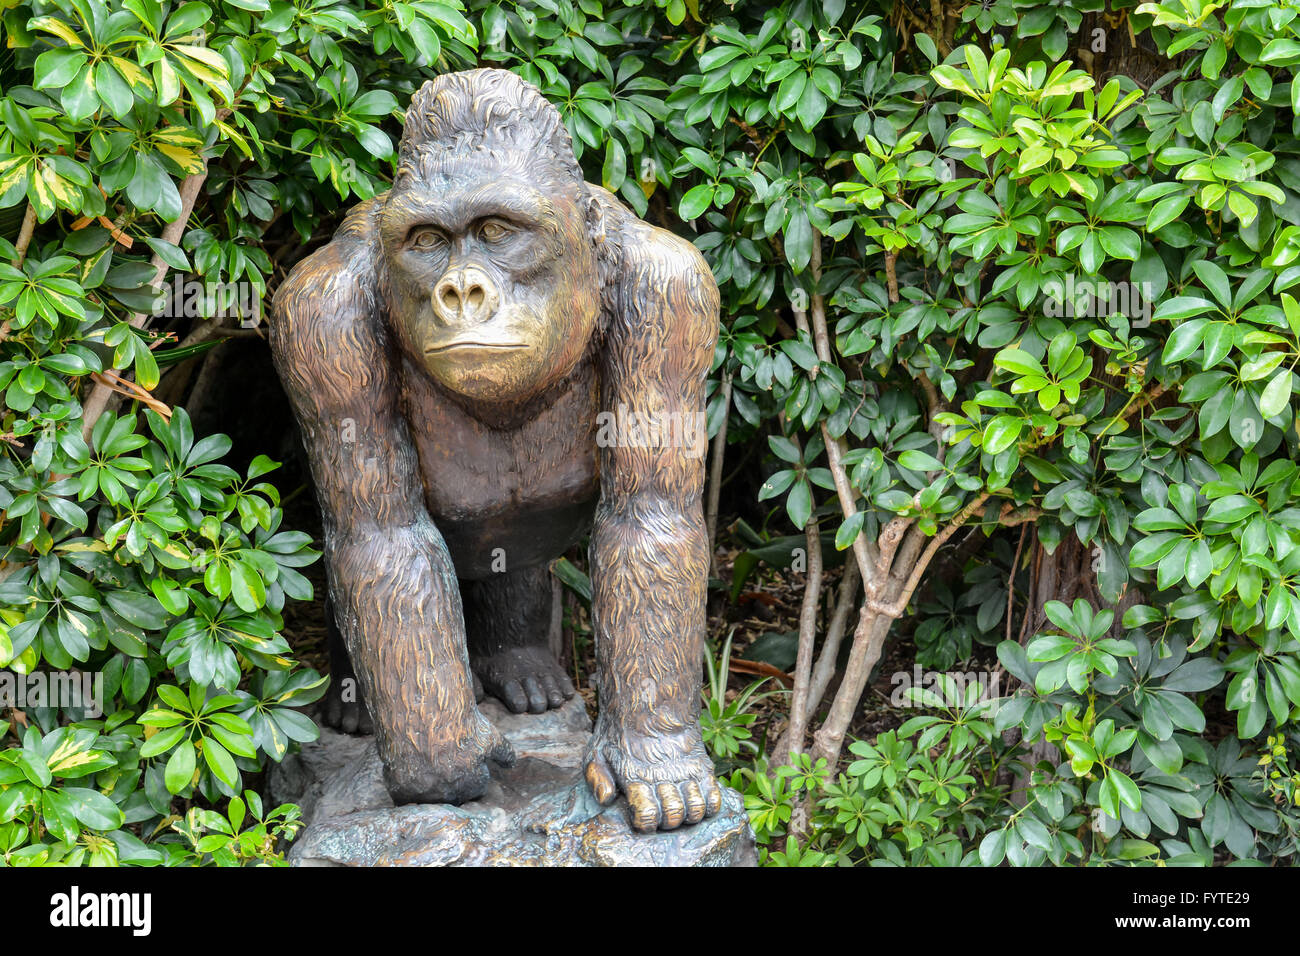 Statue of Strong Gorilla Stock Photo - Alamy